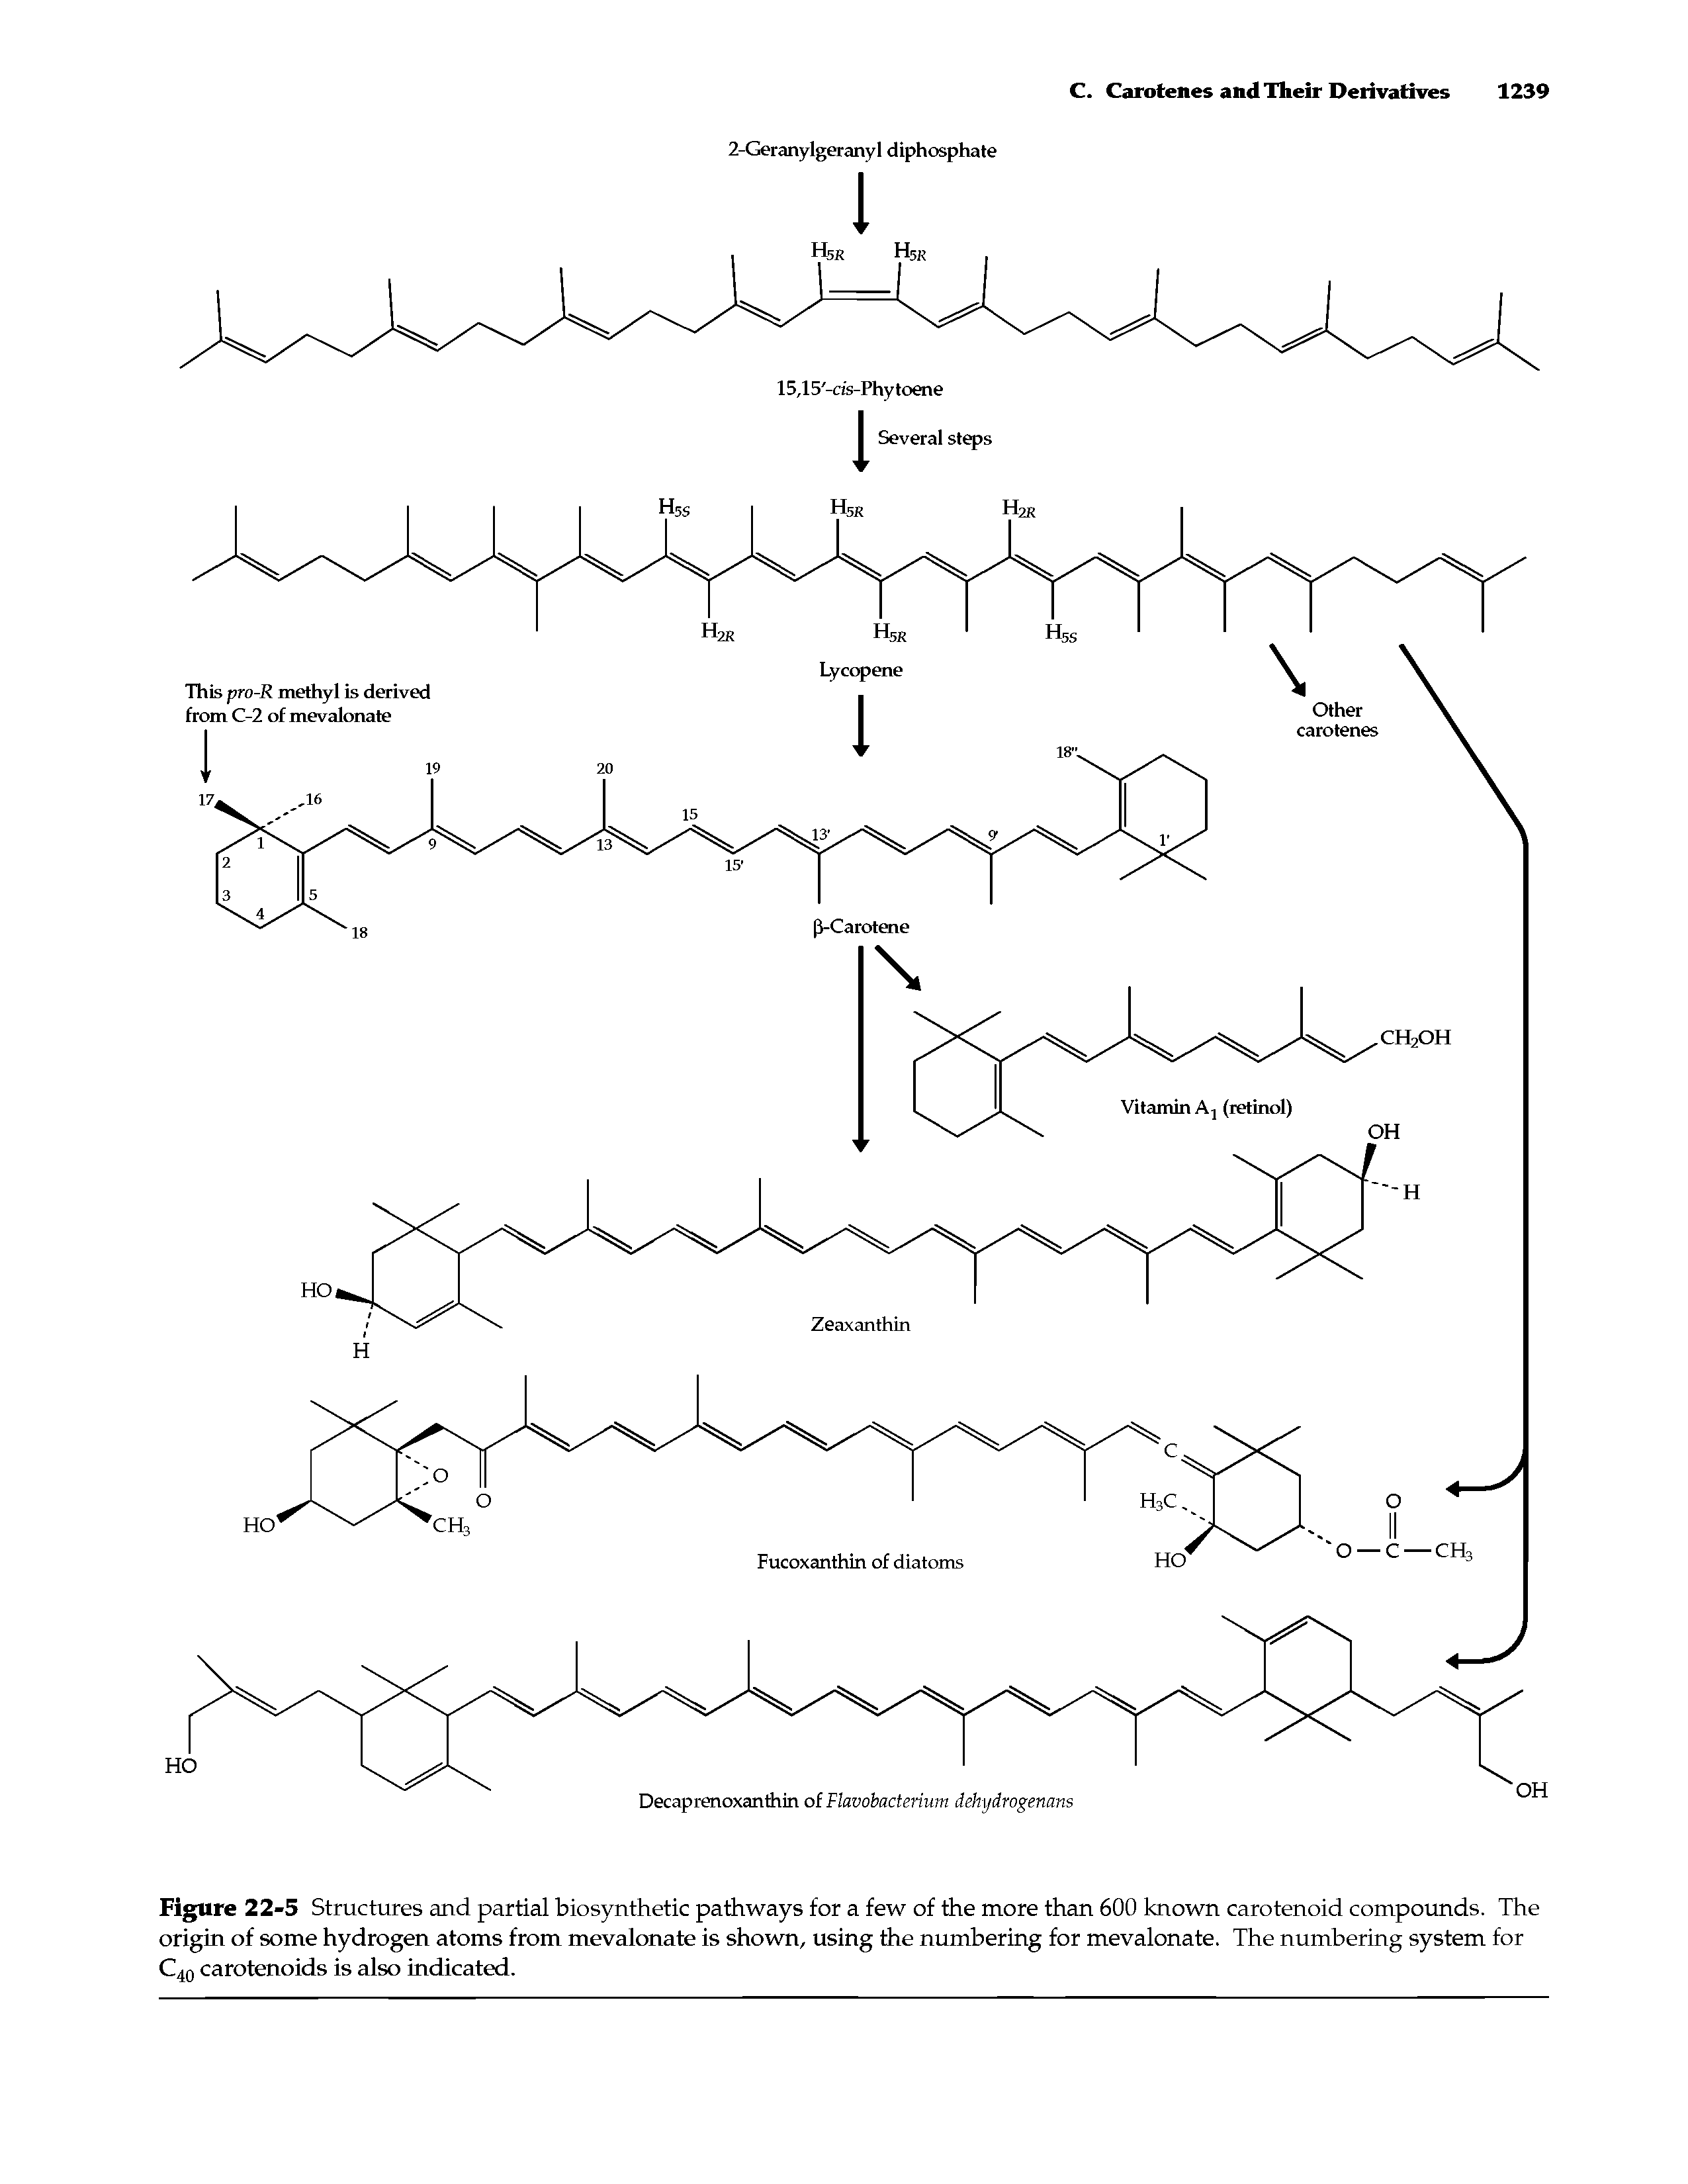 Figure 22-5 Structures and partial biosynthetic pathways for a few of the more than 600 known carotenoid compounds. The origin of some hydrogen atoms from mevalonate is shown, using the numbering for mevalonate. The numbering system for C40 carotenoids is also indicated.